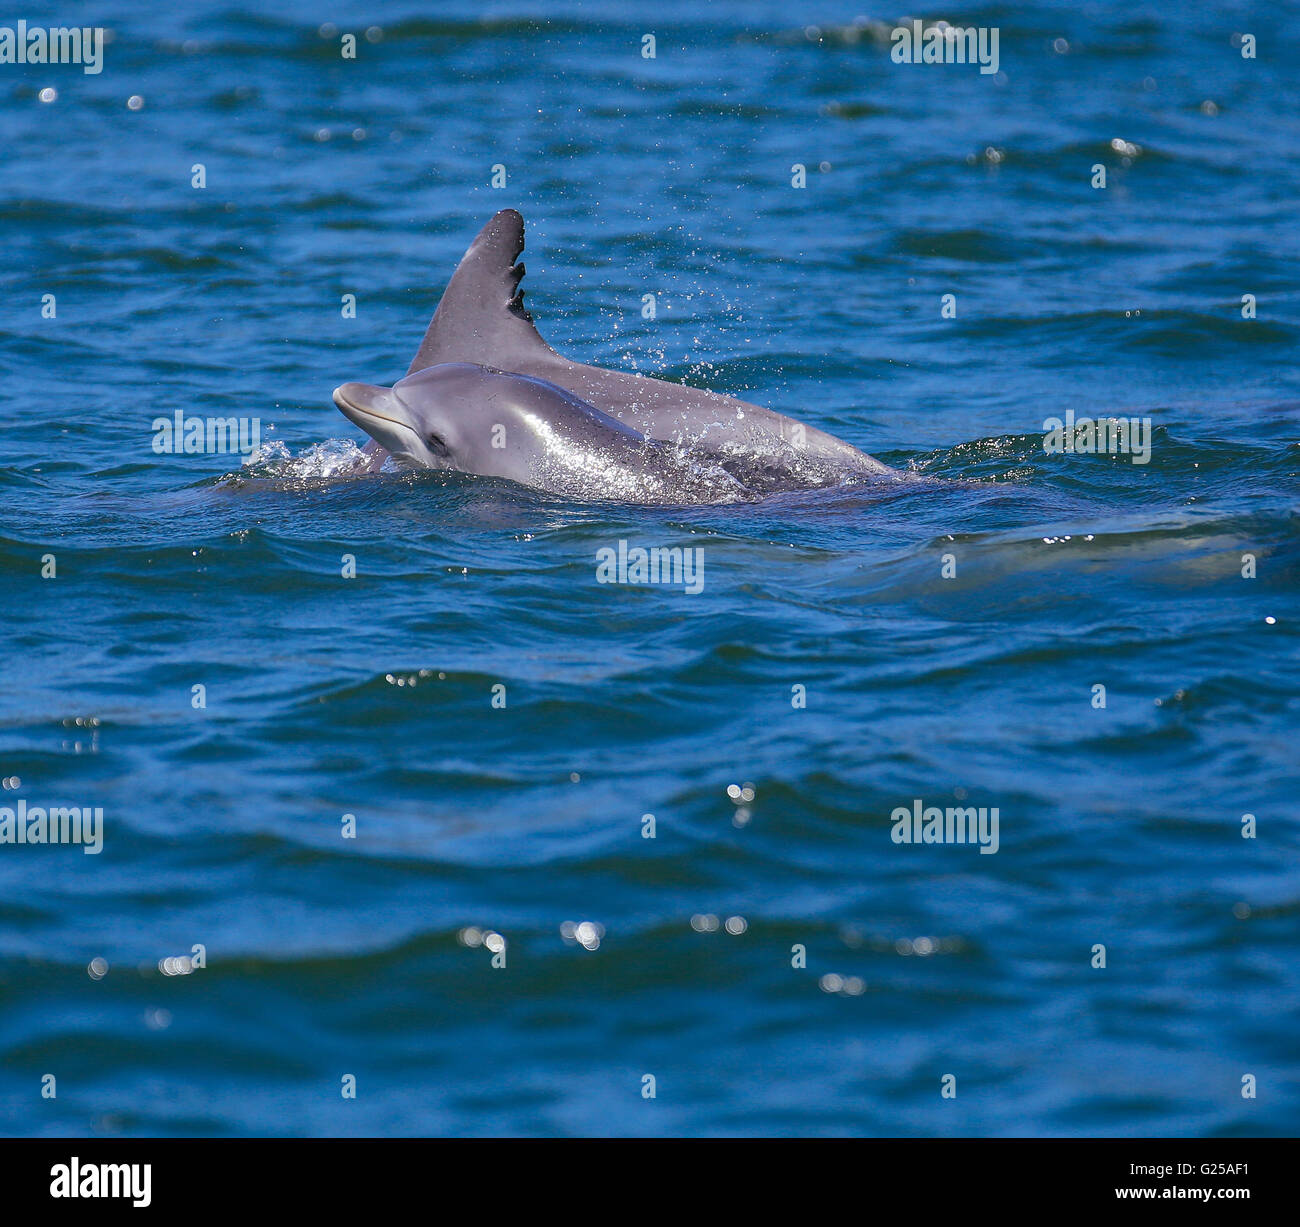 Two dolphins swimming in ocean, Port Stephens, New South Wales, Australia Stock Photo